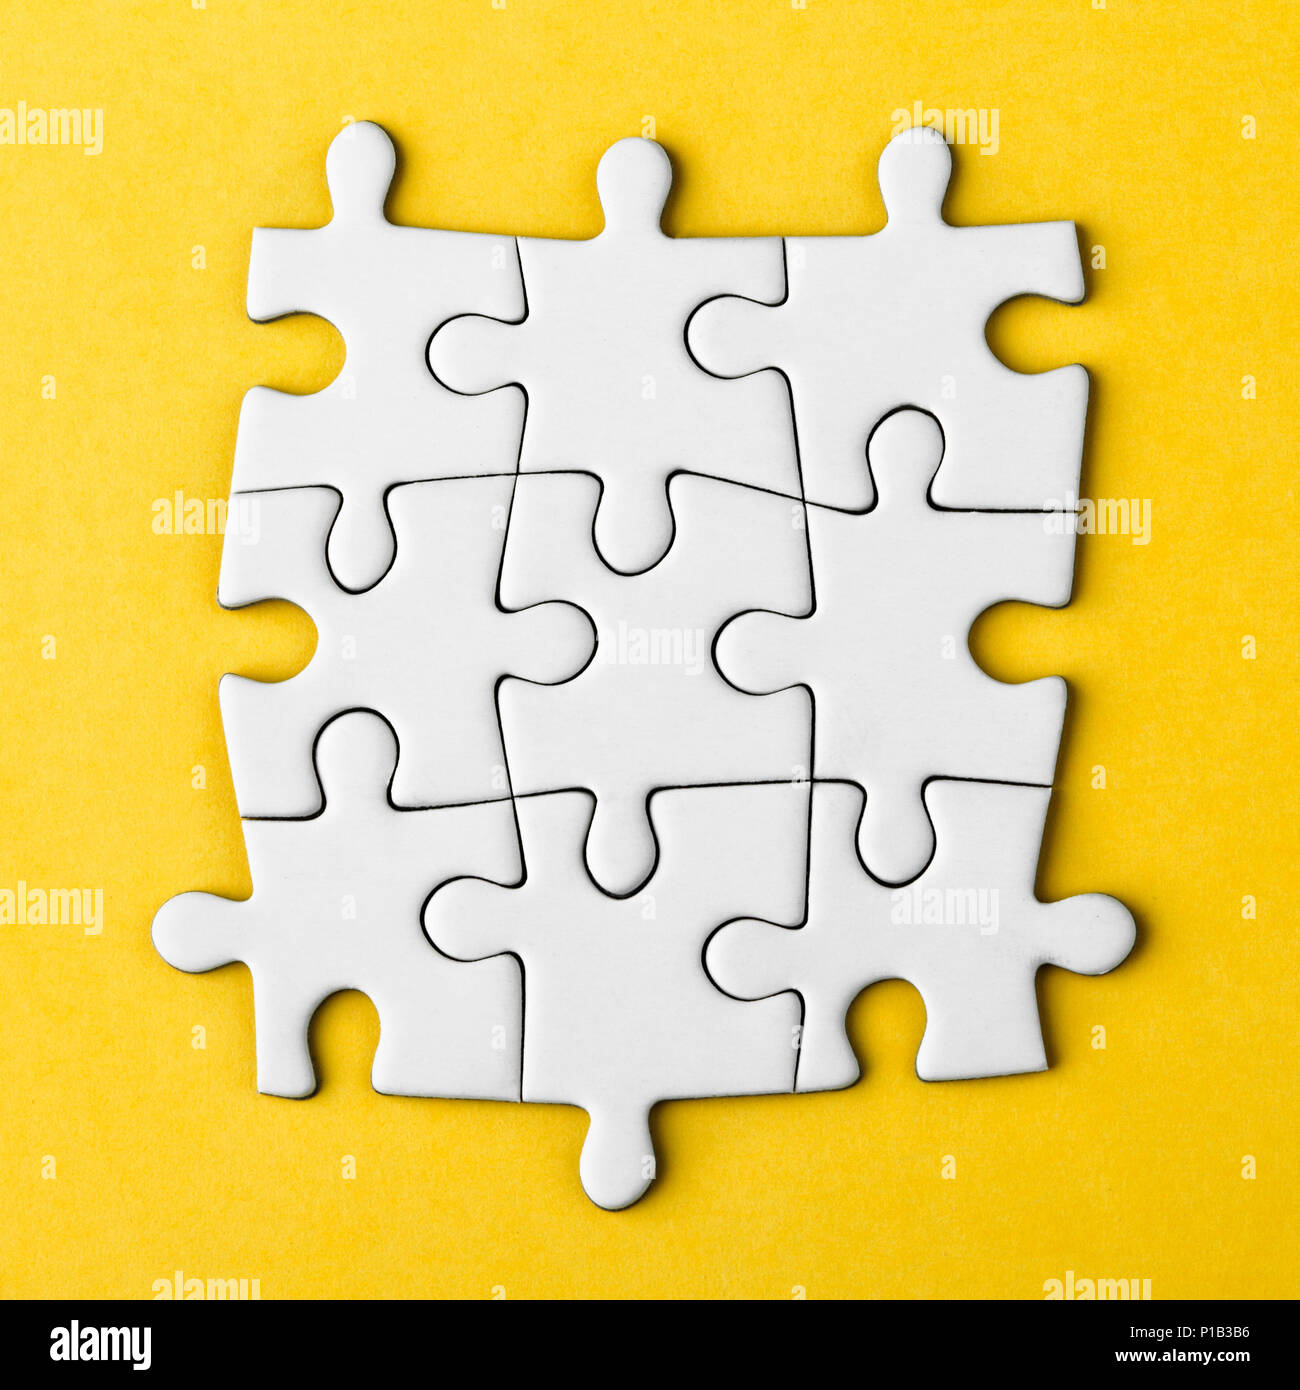 Connected blank puzzle pieces Stock Photo